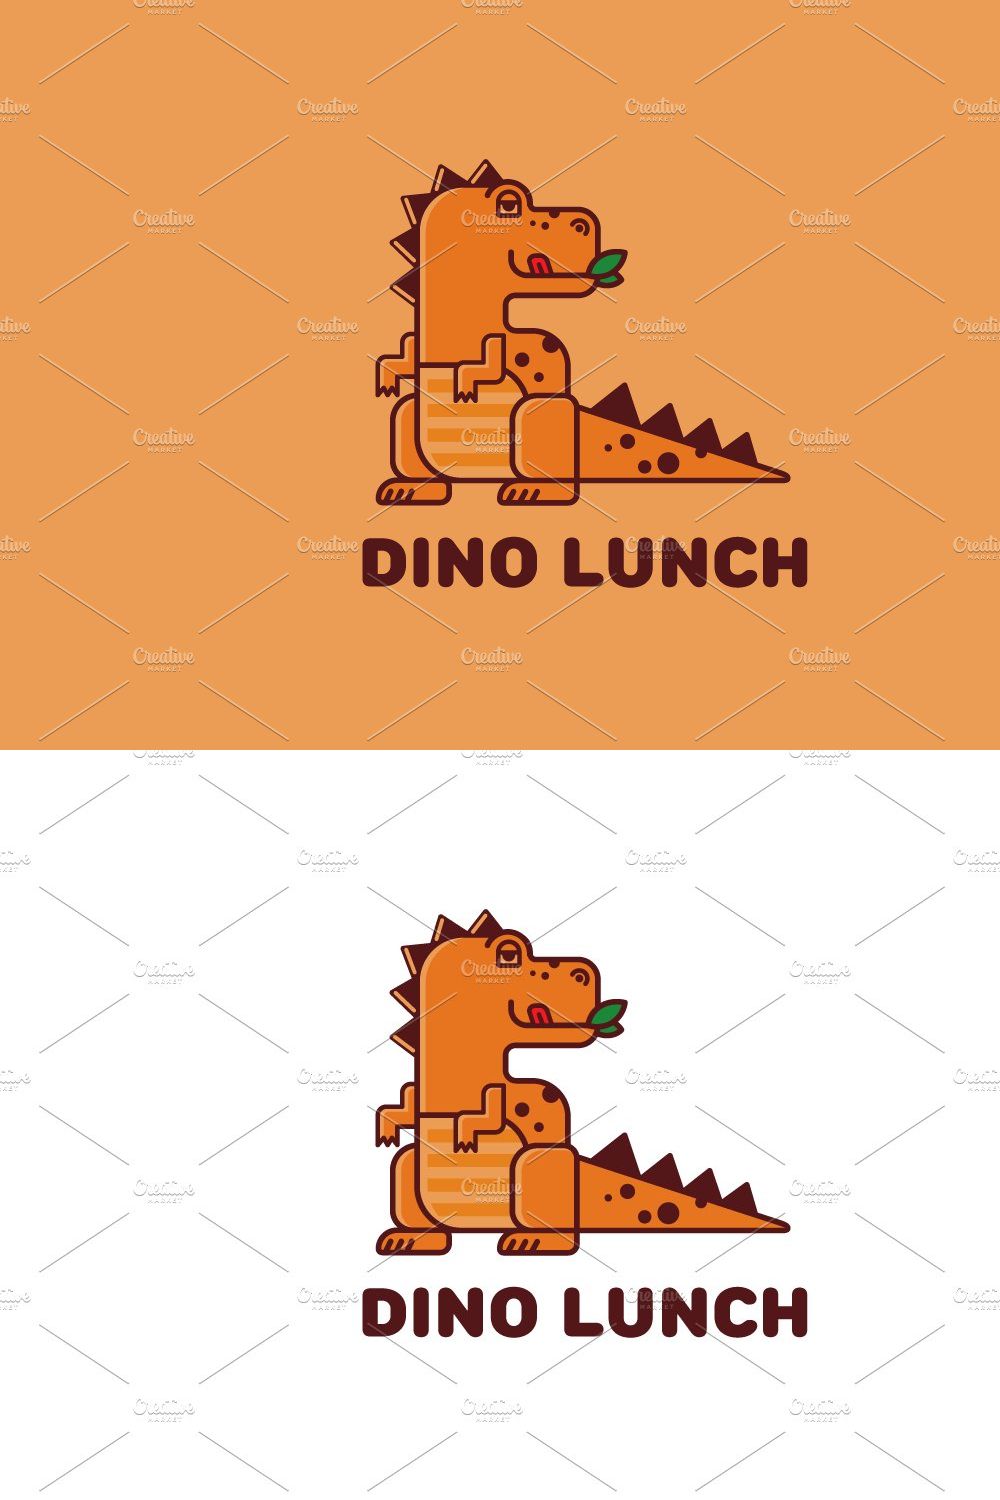 Dino lunch pinterest preview image.